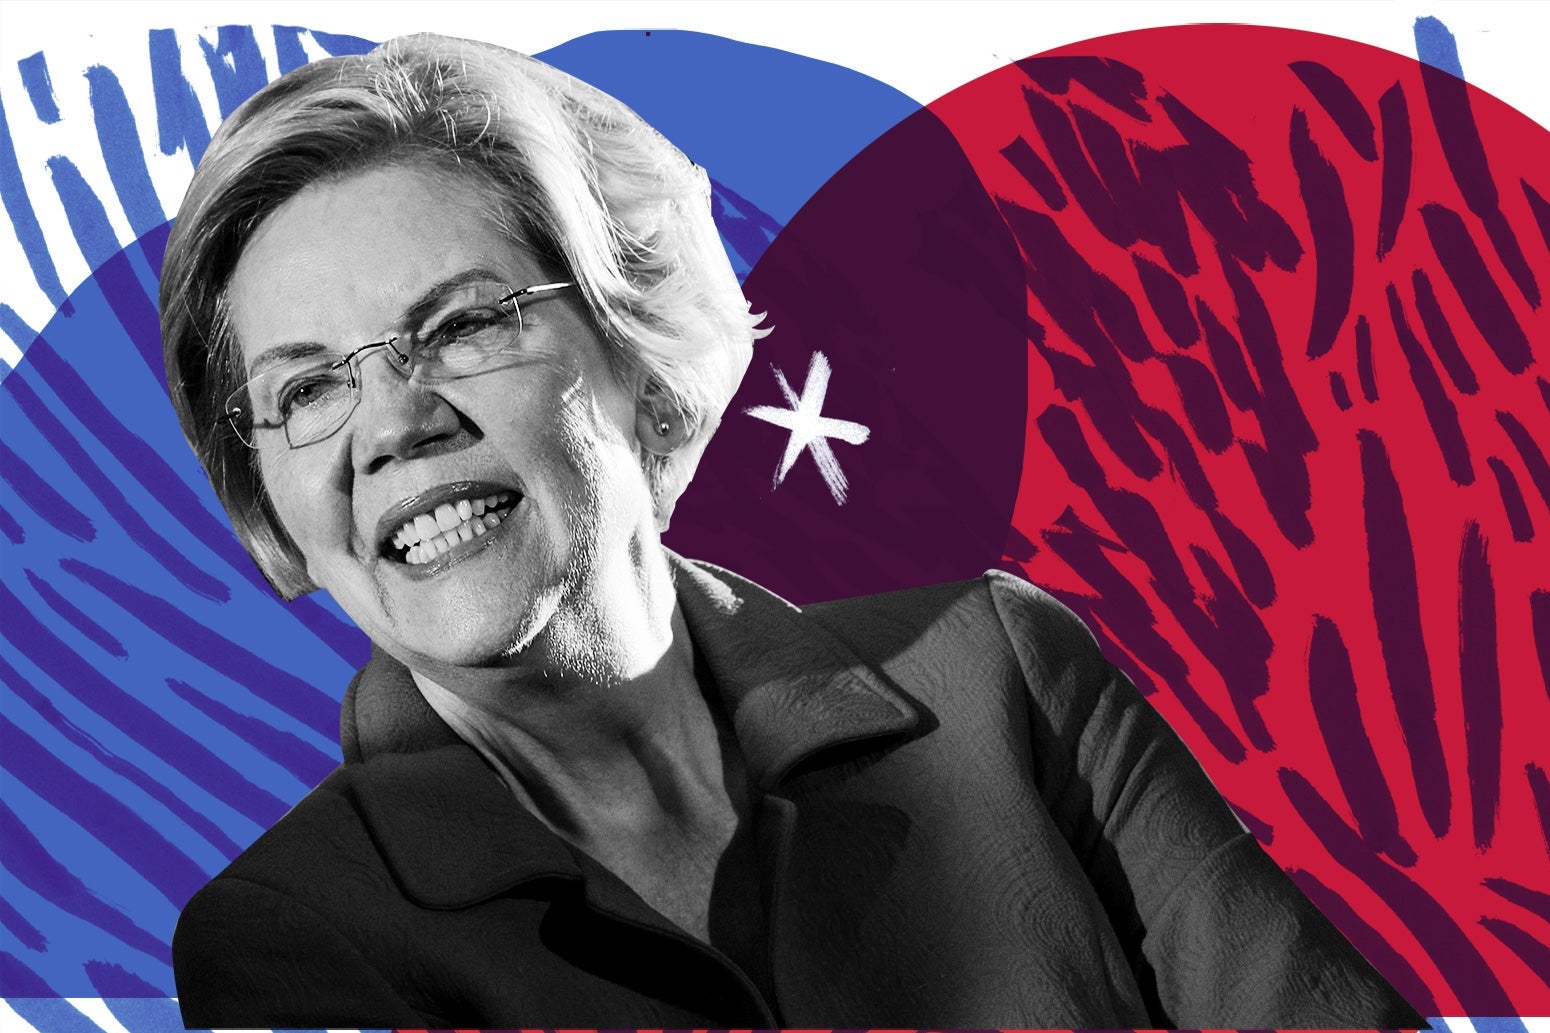 Elizabeth Warren, with that red, white, and blue